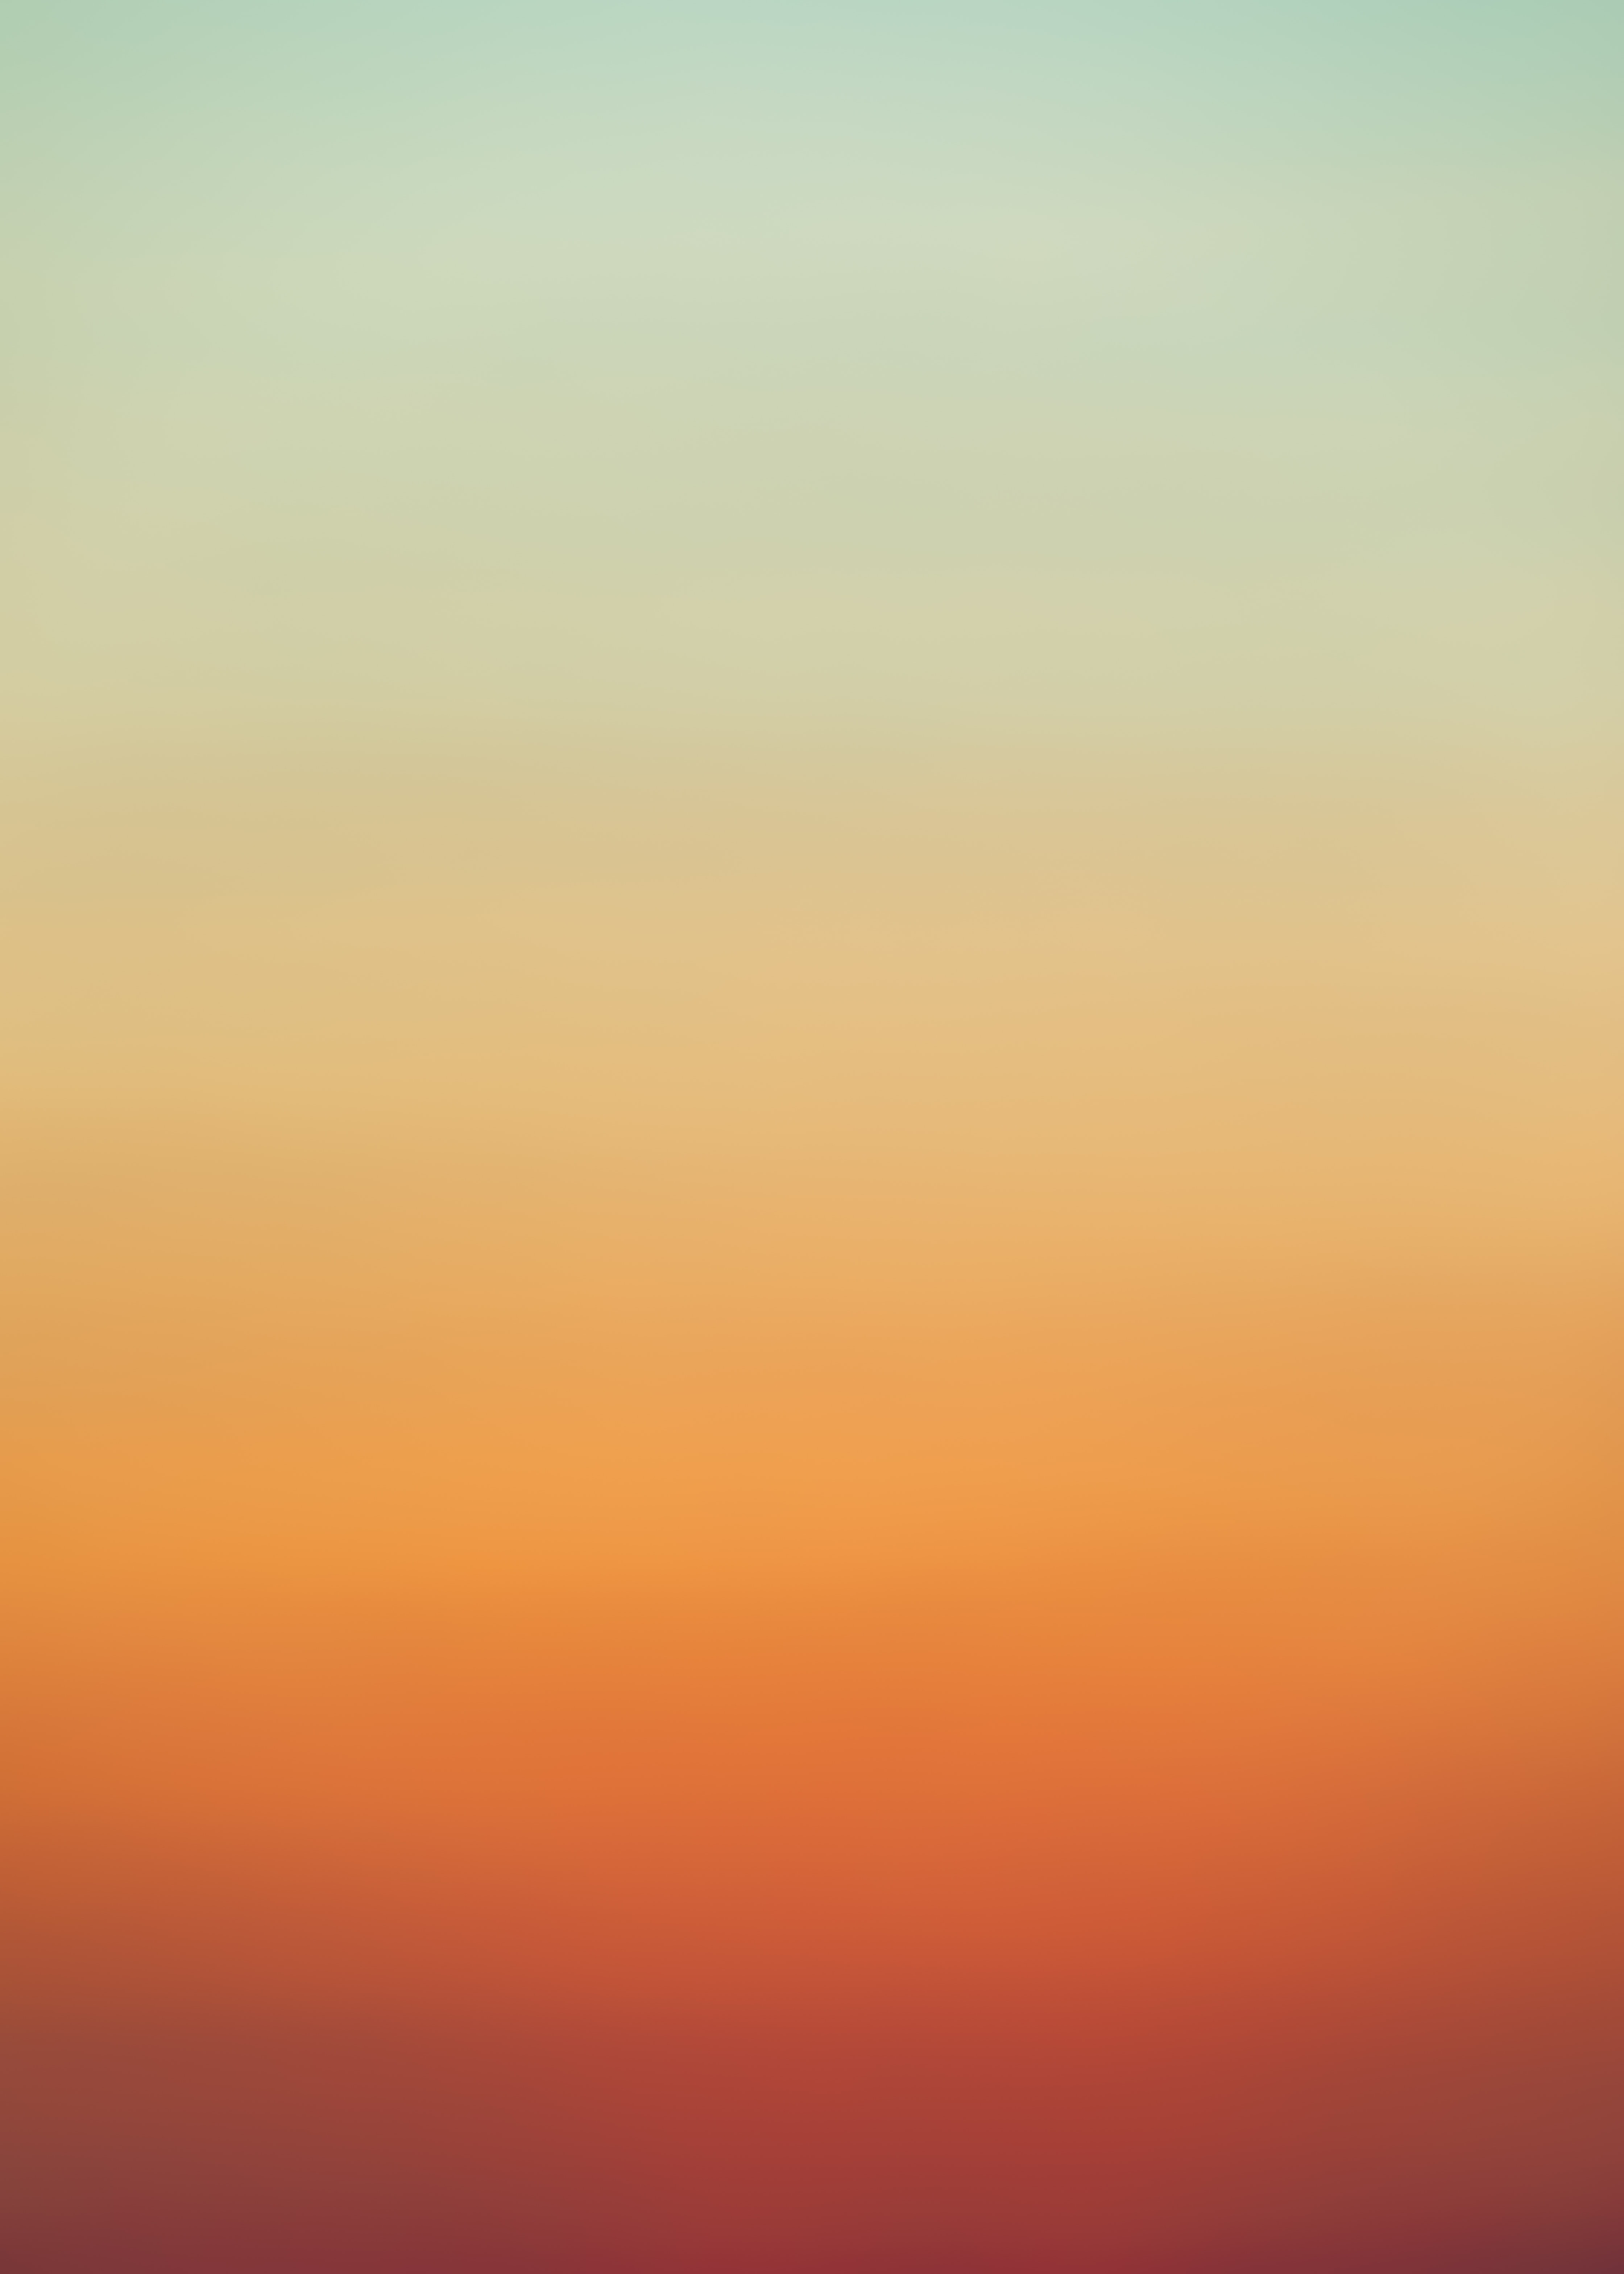 color, gradient, background, abstract, yellow, orange Full HD